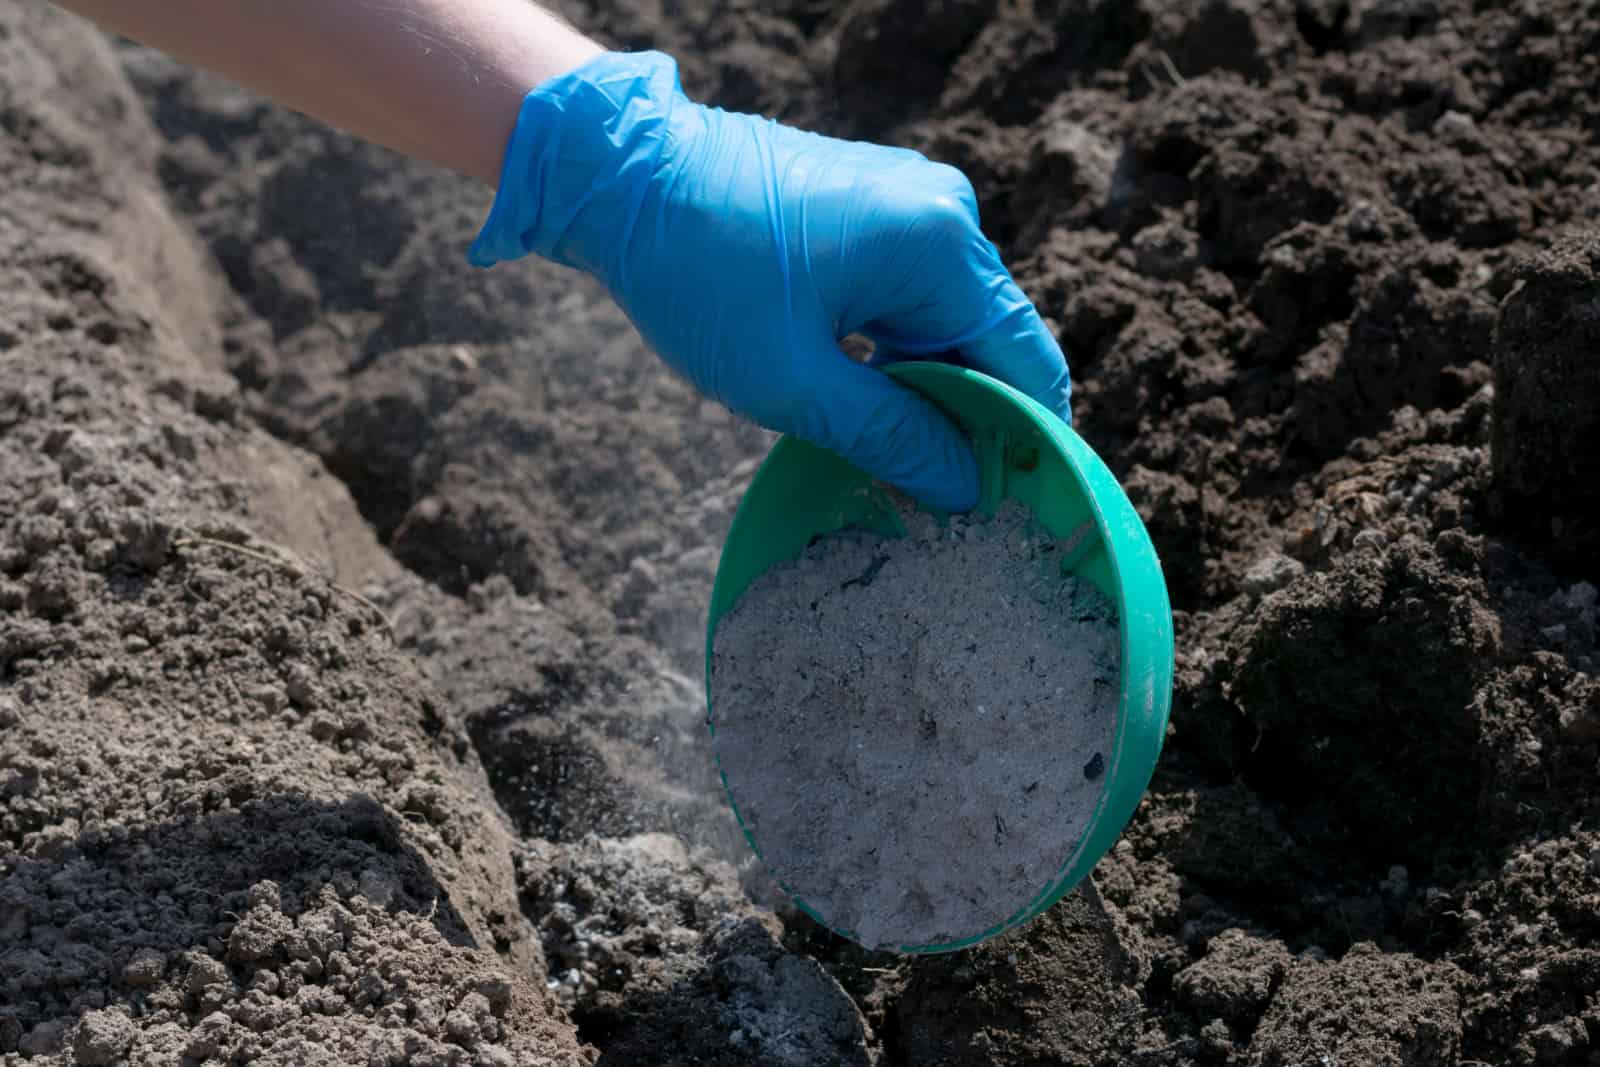 Gardener's hand in blue glove holds ash container and pours in soil